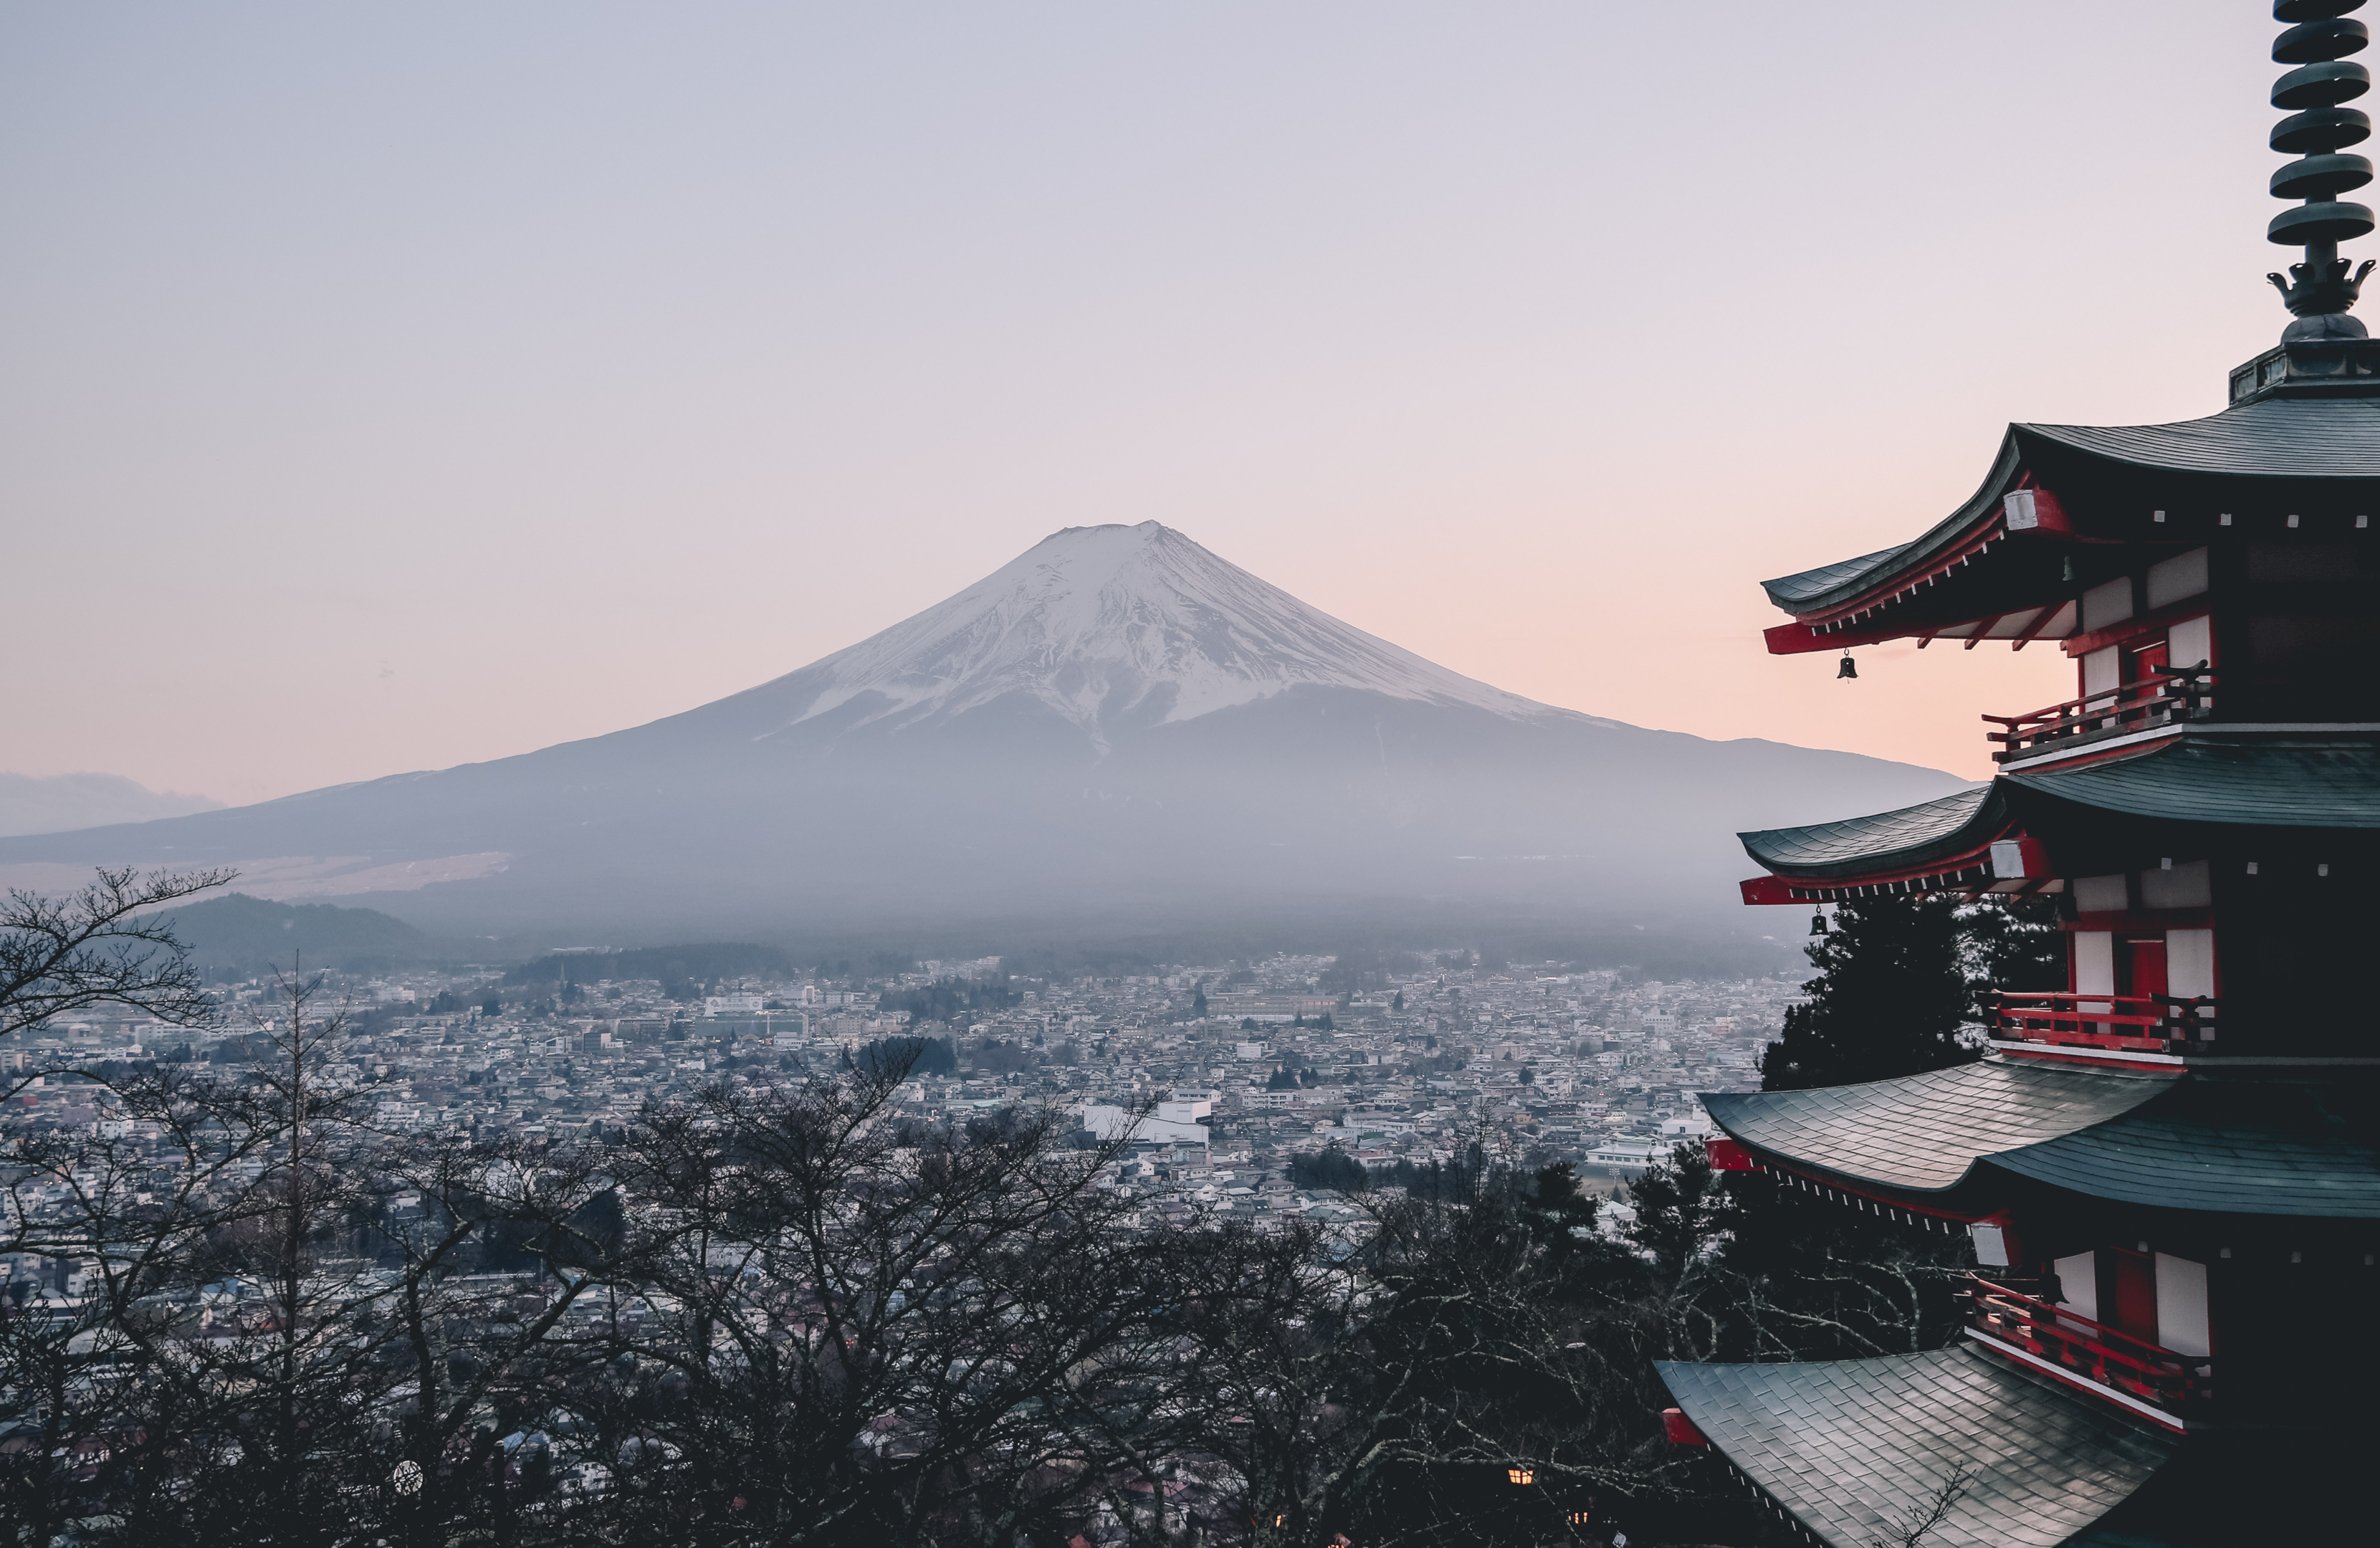 A Japanese landscape: Mount Fuji and a temple.